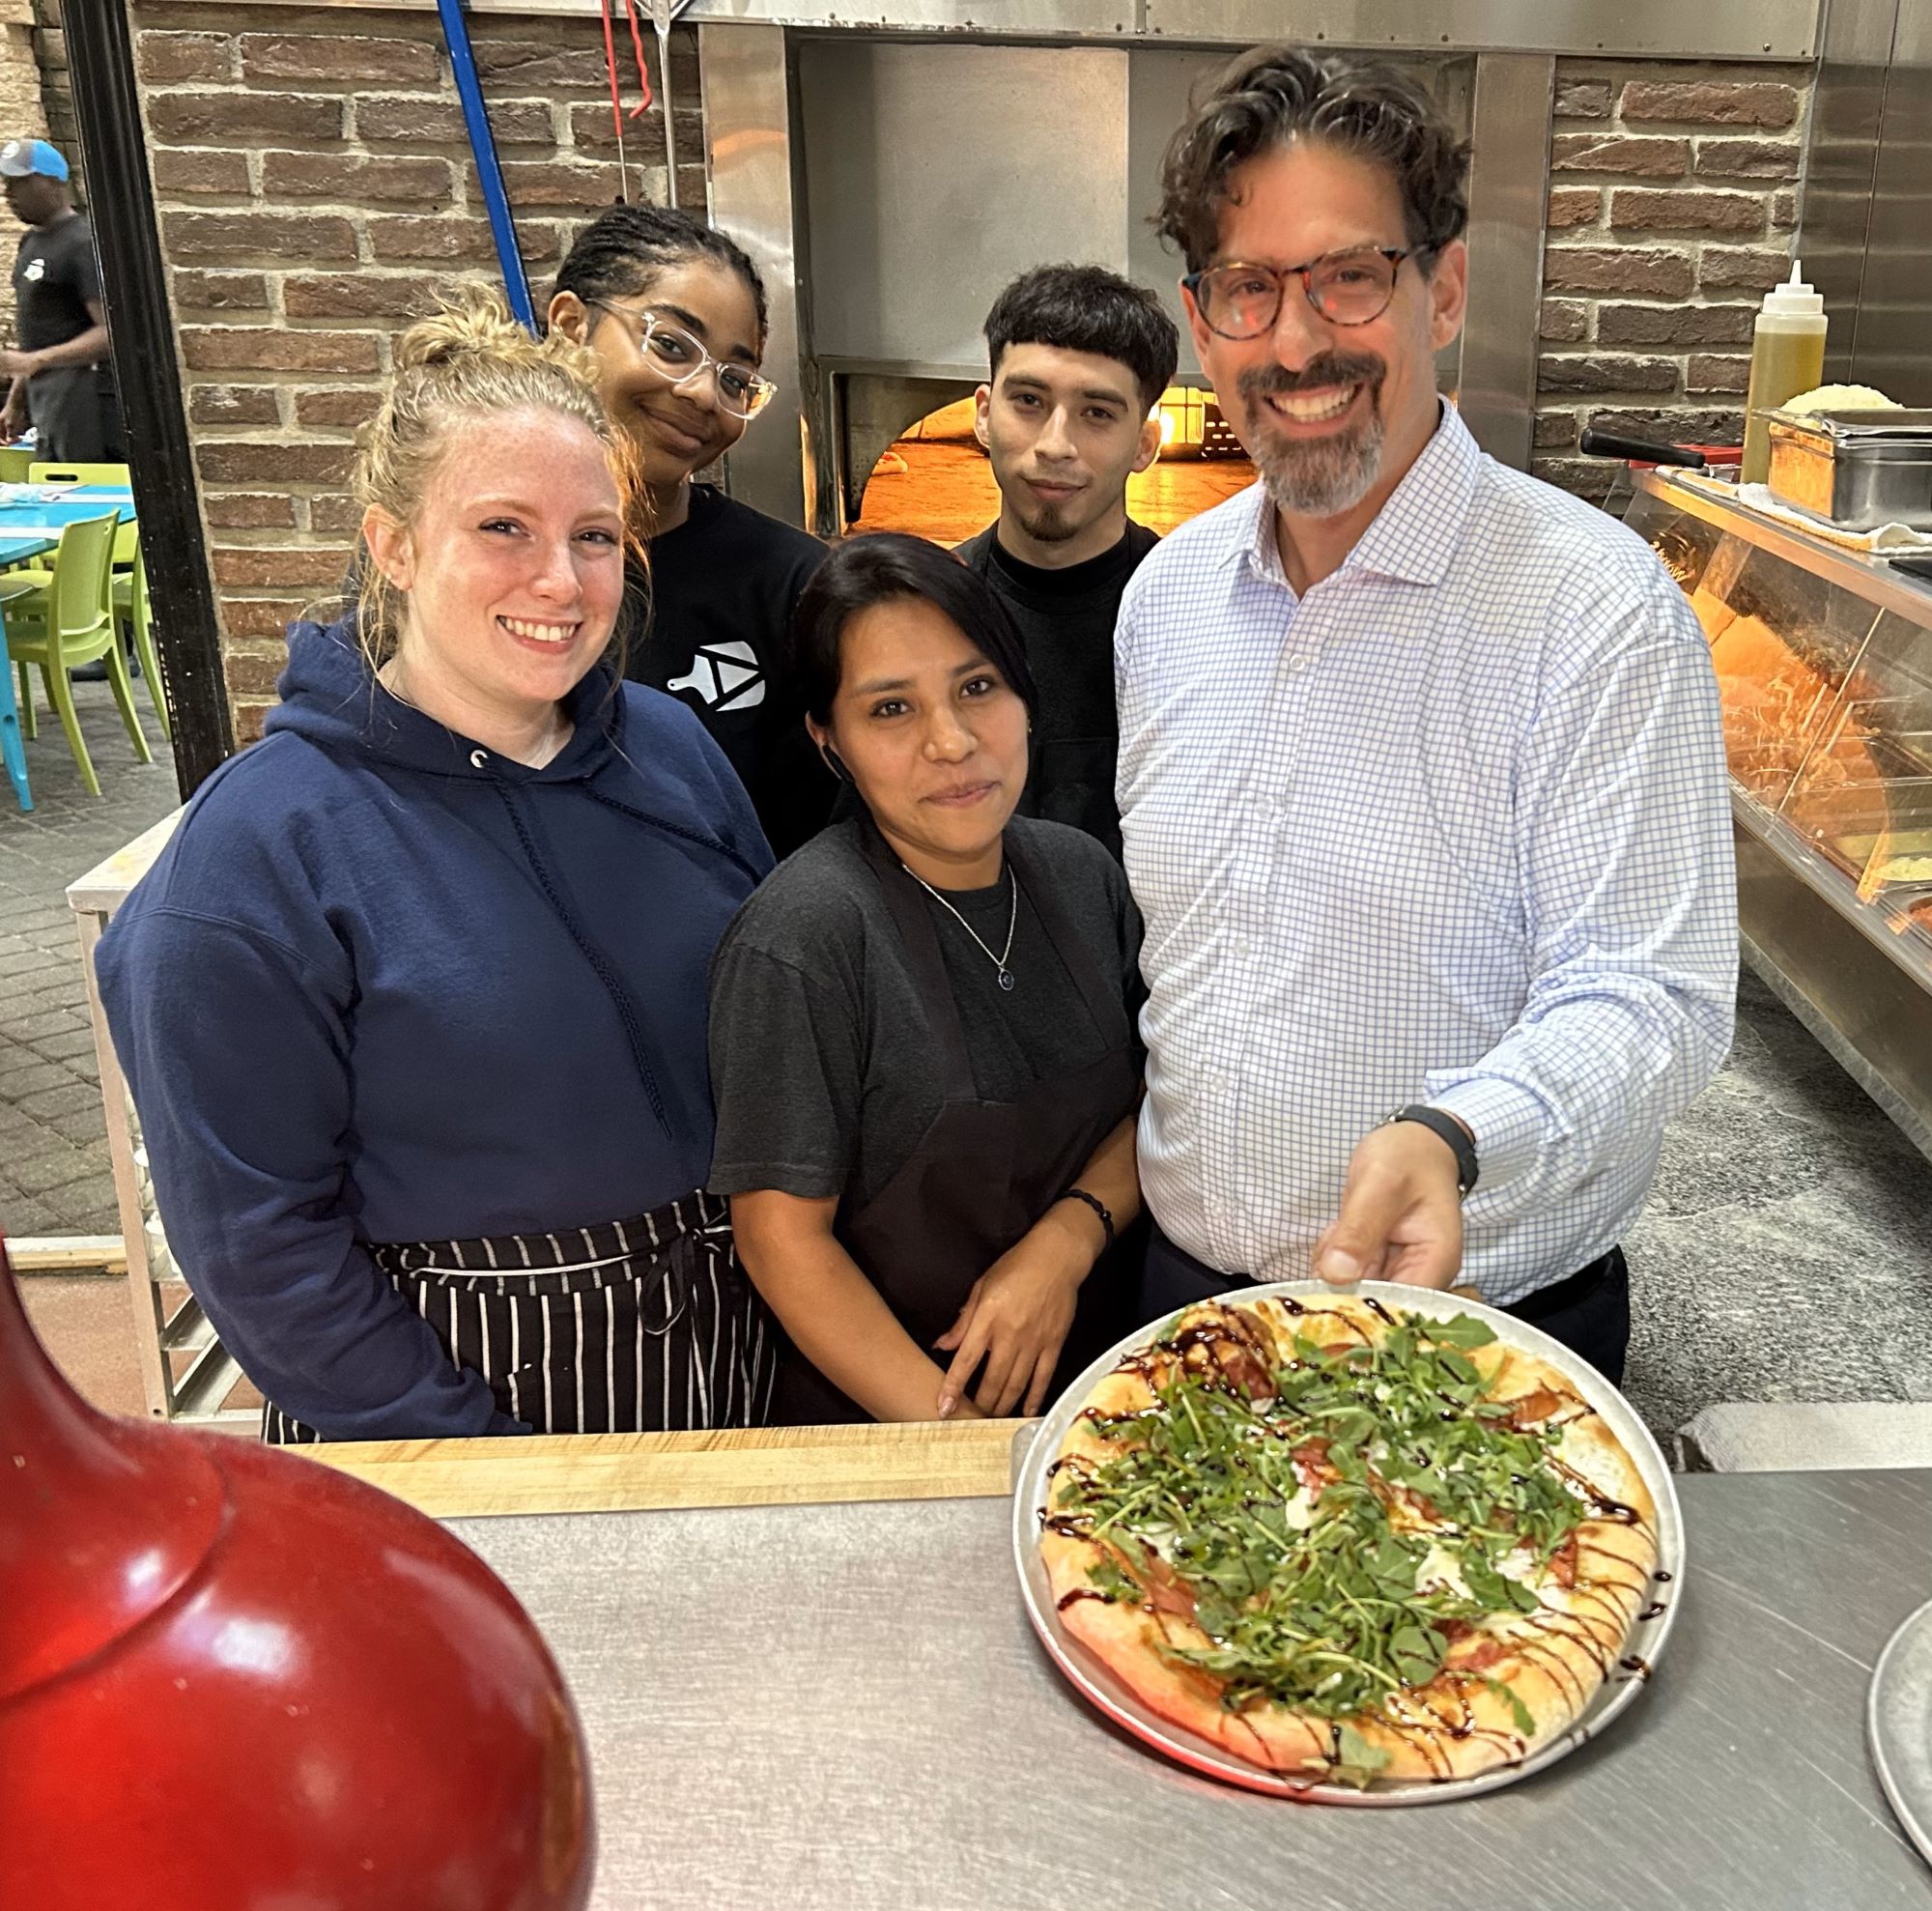 Ava’s Pizzeria & Wine Bar staff in St. Michaels gather in honor of the restaurant’s 15th anniversary, with the Chef’s Favorite pizza, shown, offered at a special price this October of $10.19 in recognition of the day the restaurant opened. Pictured from the left are Danella Gilligan, Makia Morton, Celina Perez Garcia, Edwin Martinez, and Chris Agharabi. Reservations and more are at www.avaspizzeria.com.